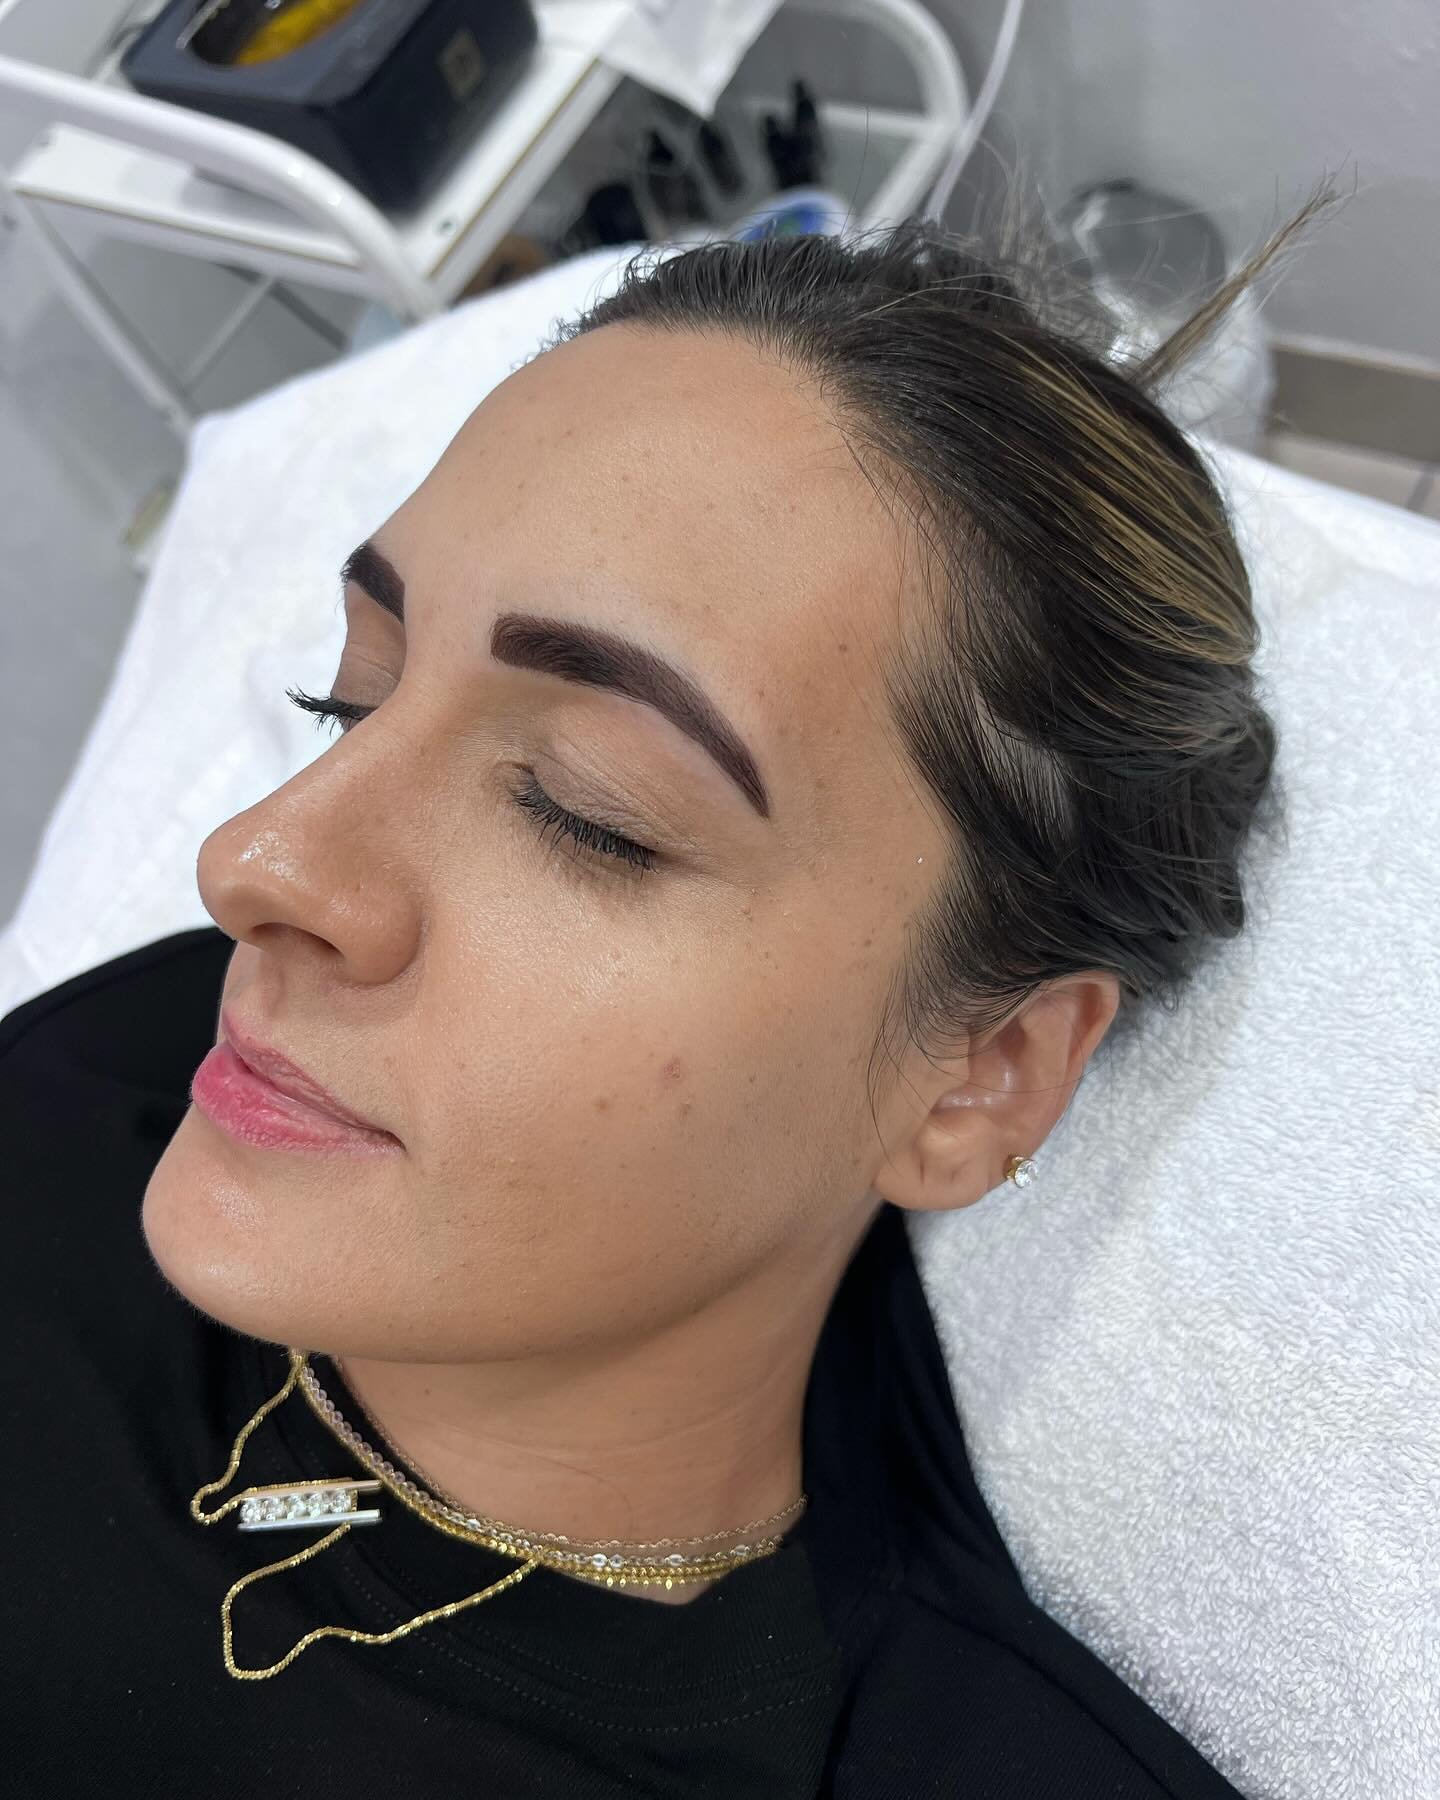 Just a reminder that brow services are offered at Ensō!

Brow stain (henna &amp; tint hybrid) is a pain free way to add thickness to sparse brows and dimension to full fluffy brows. It&rsquo;s also a great way to add brightness and youth to your face